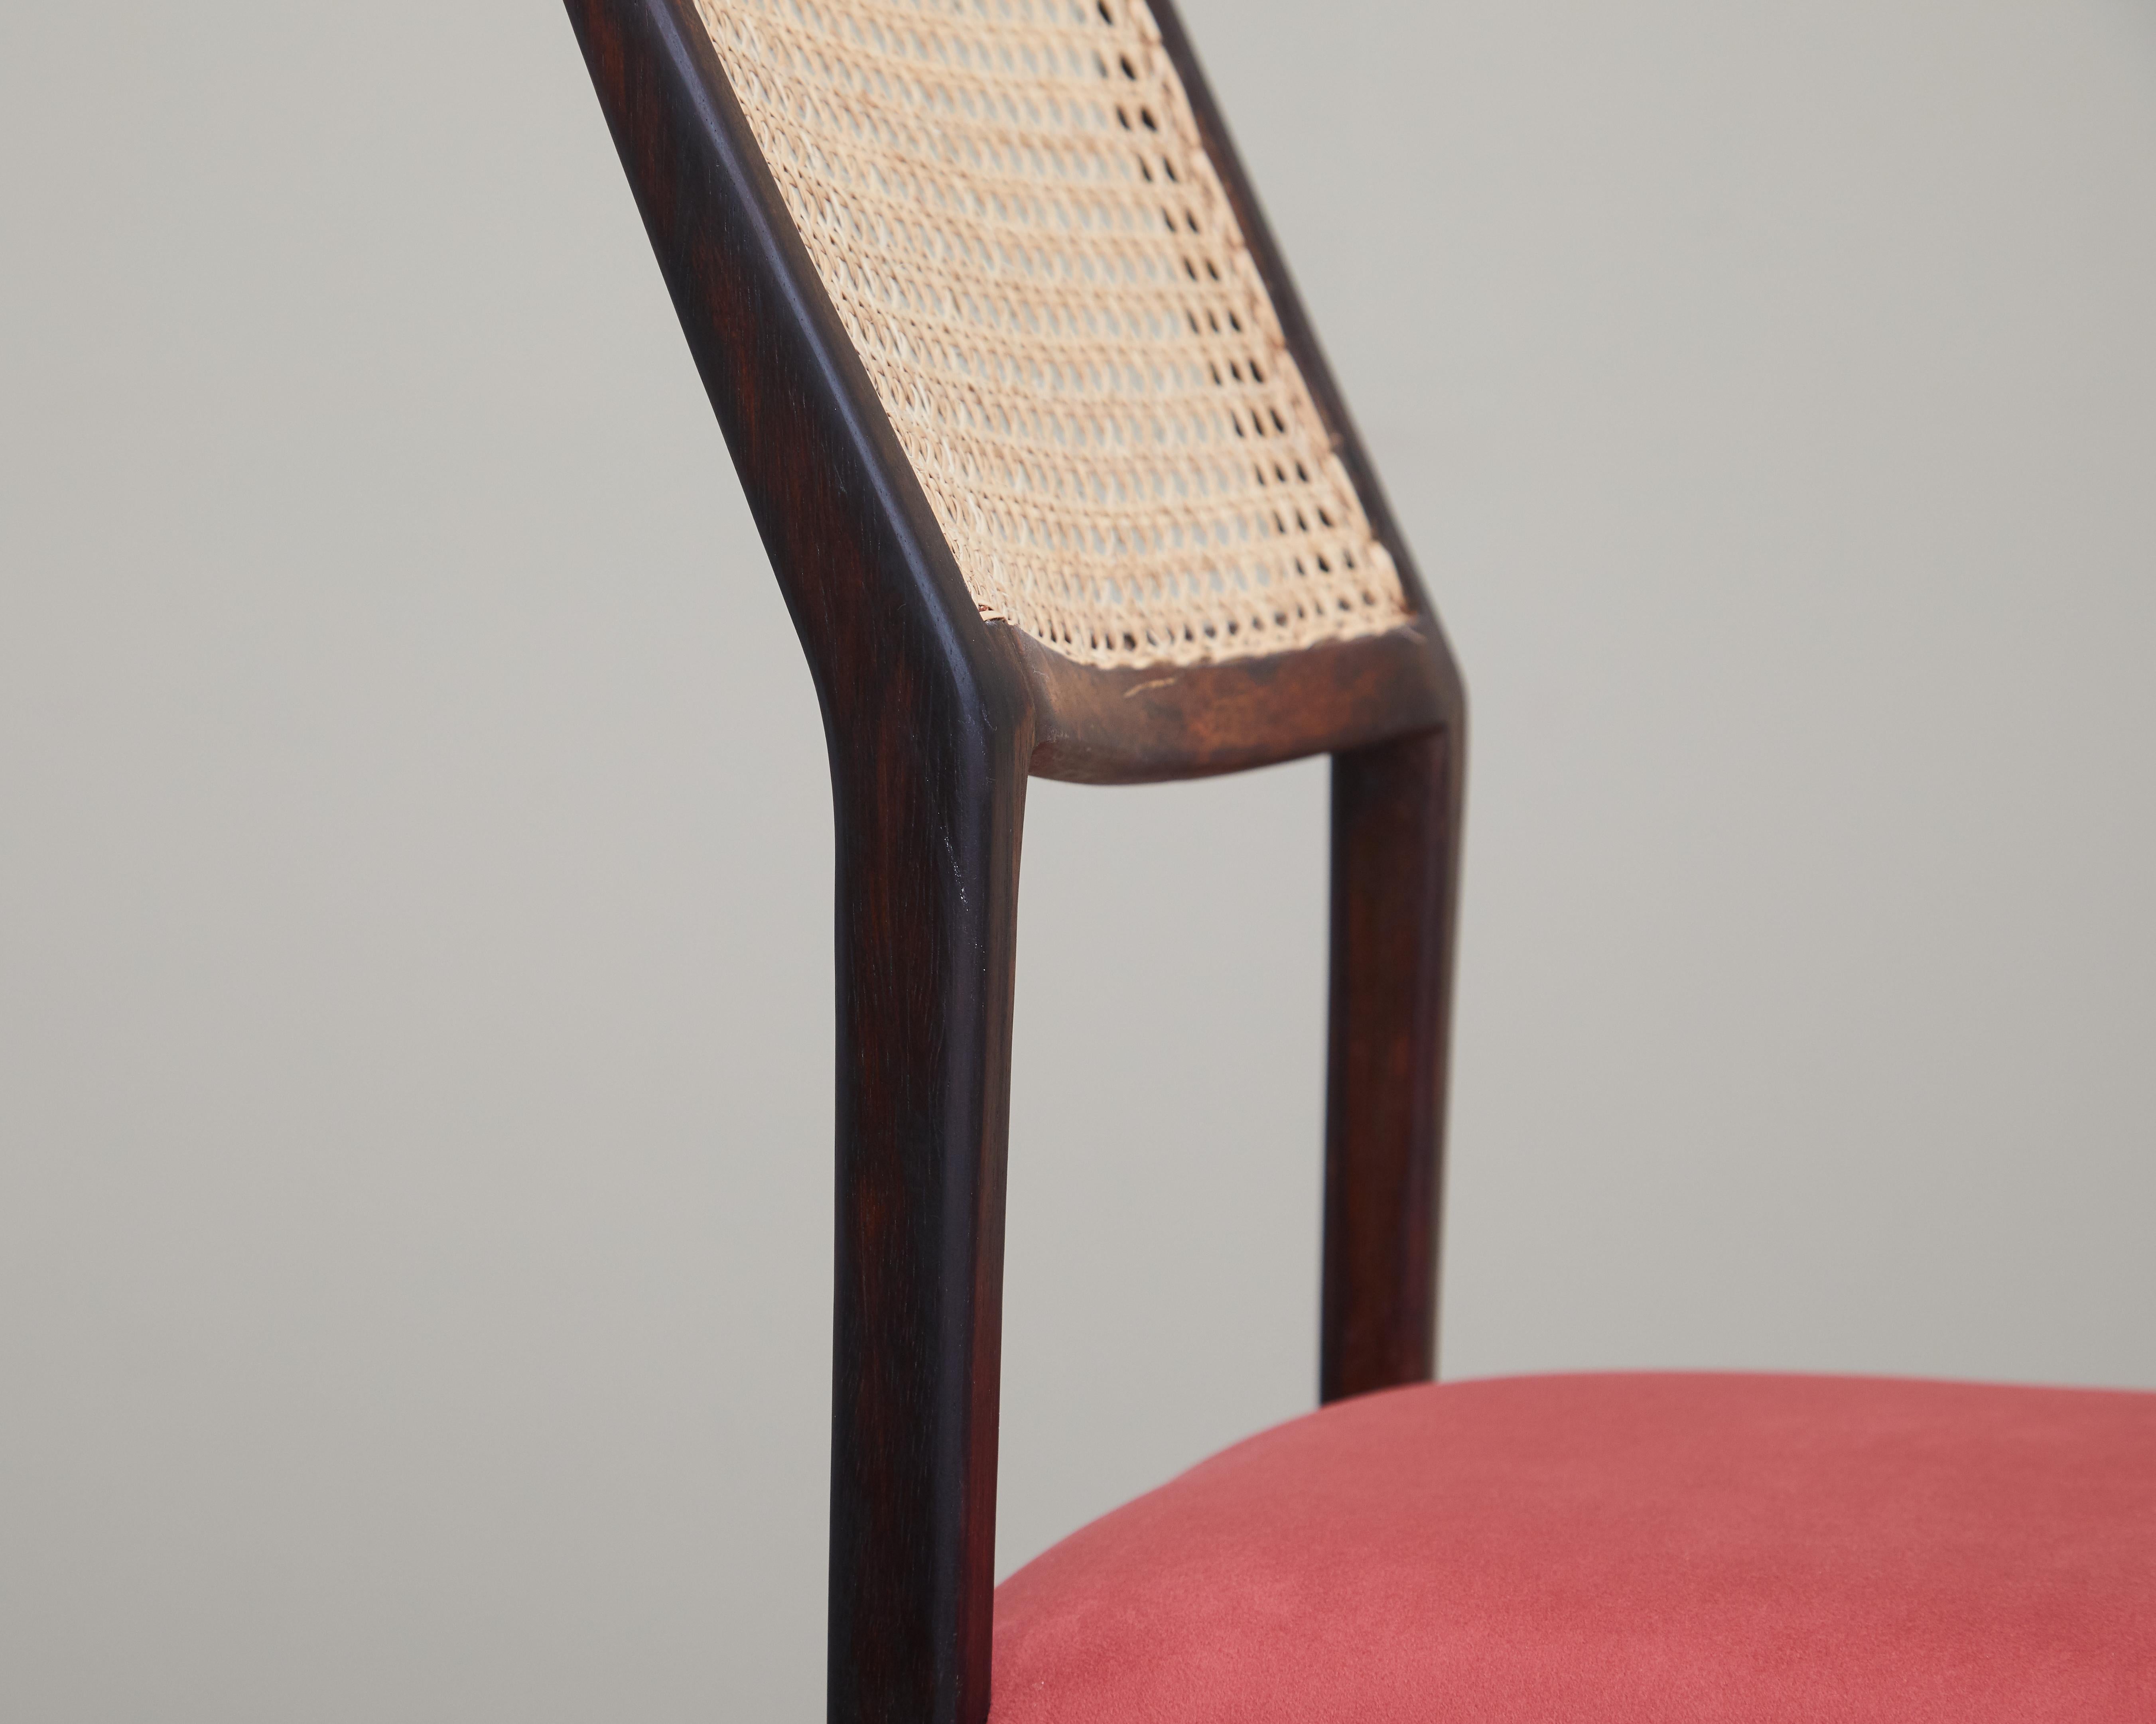 Caning Brazilian Midcentury Chairs in Rosewood and Cane Attributed to Joaquim Tenreiro